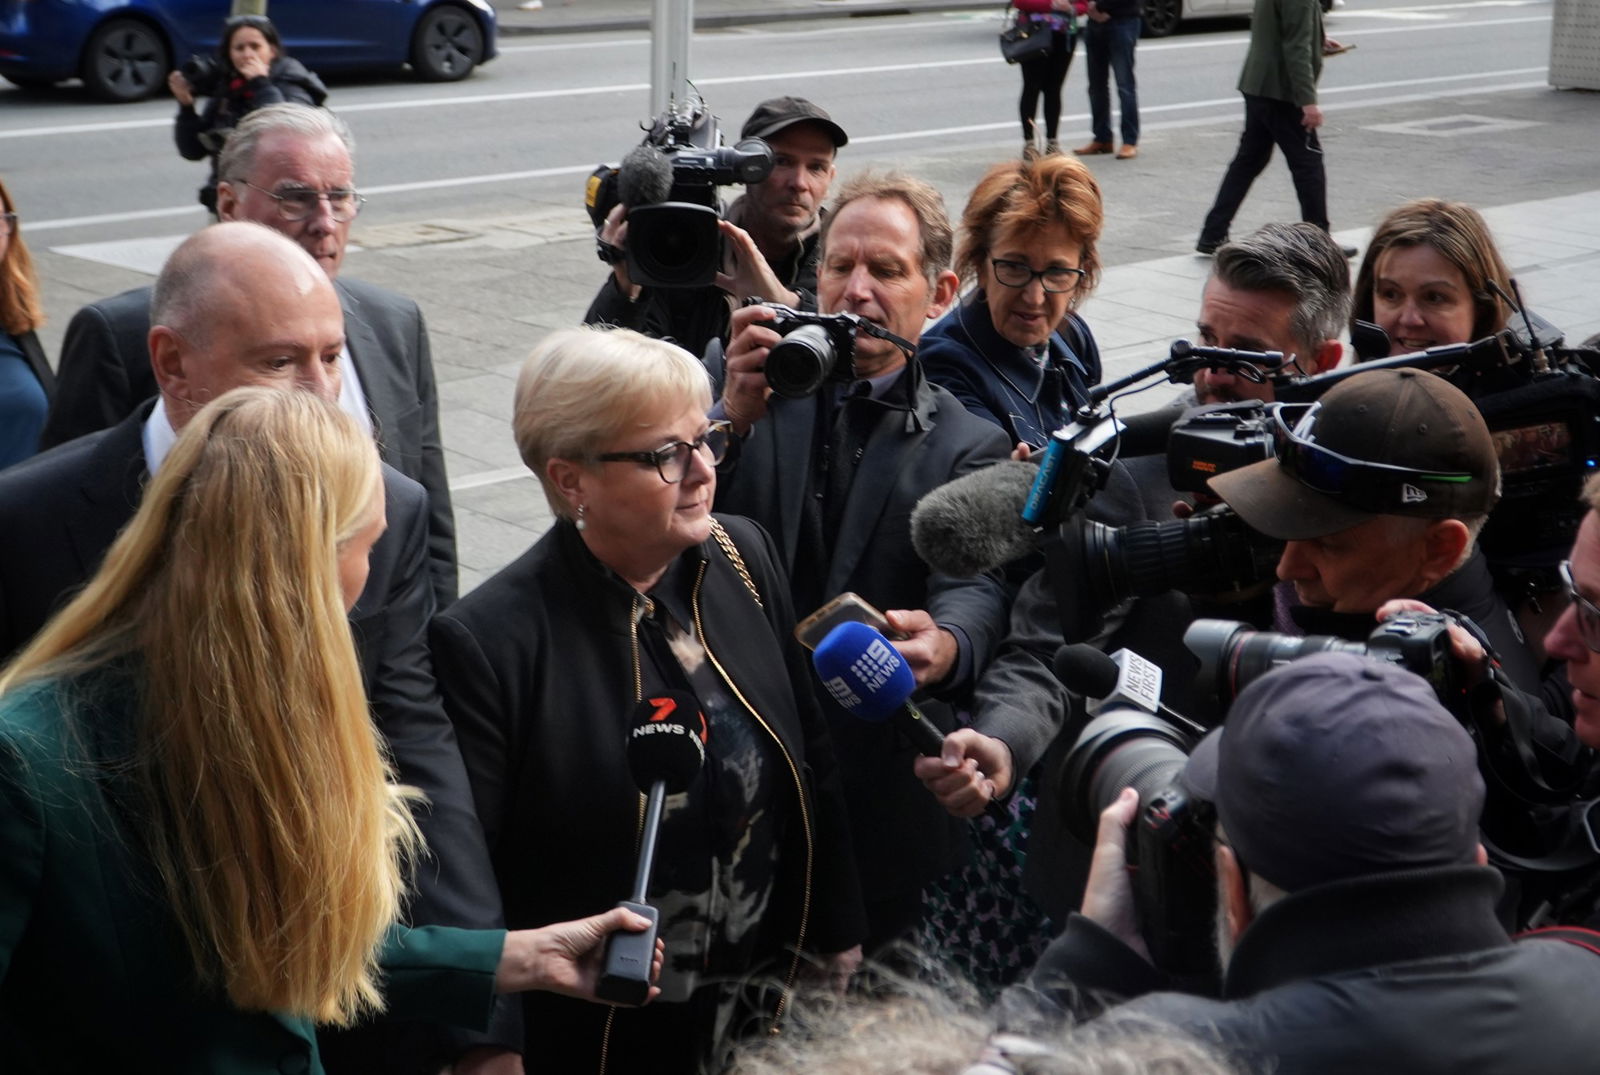 A large media scrum follows a woman into a court building